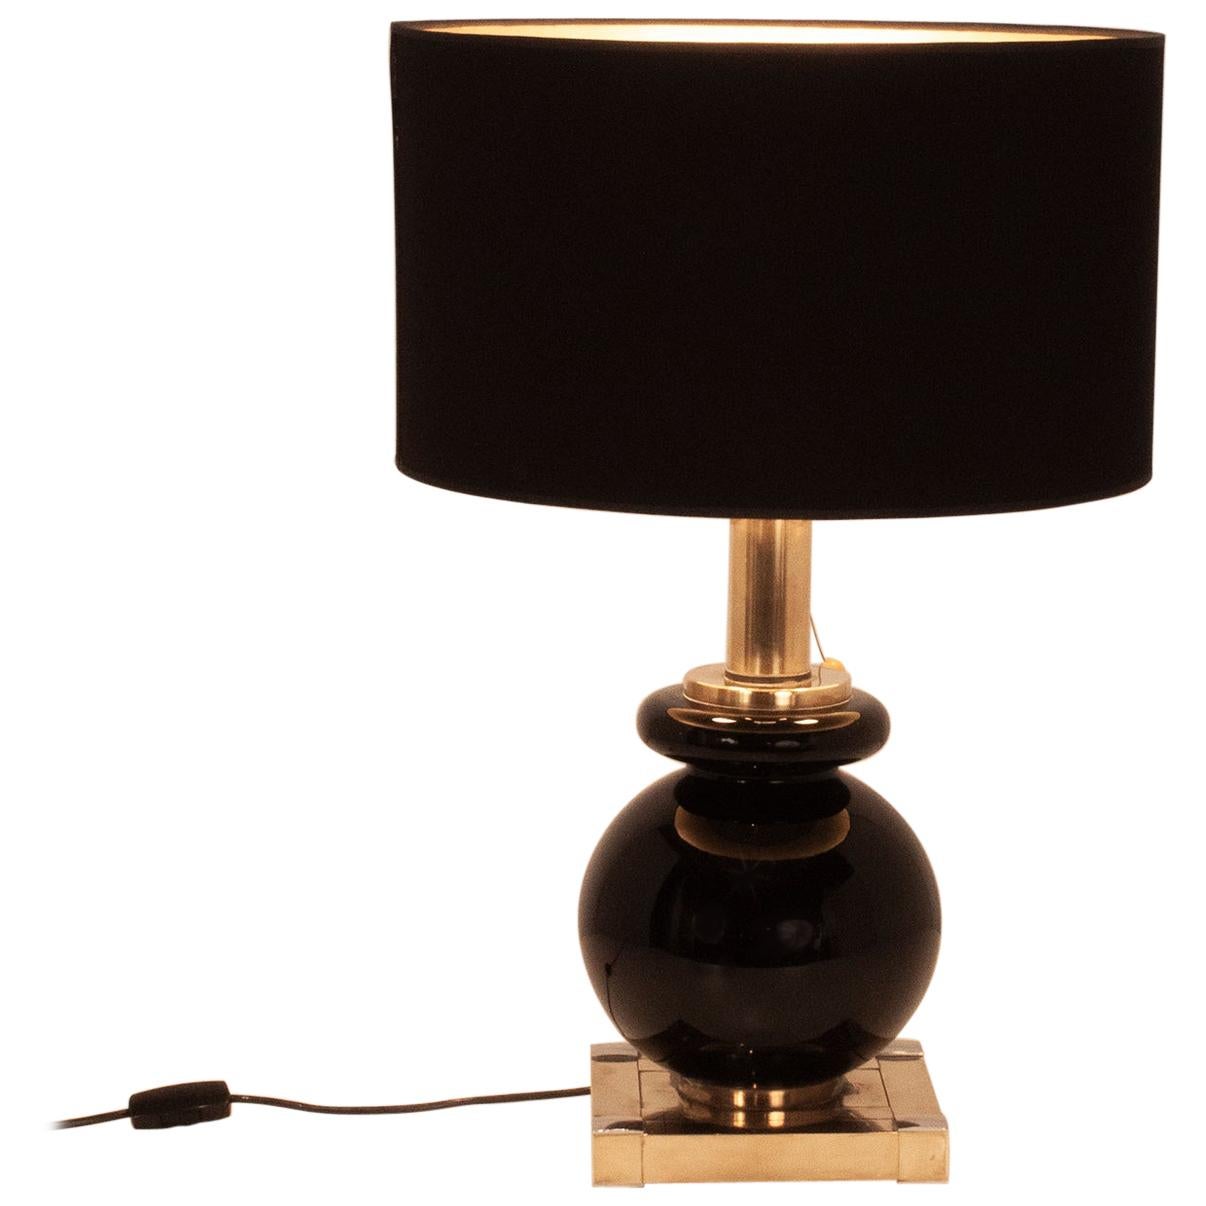 Midcentury Table Lamp Designed by Willy Rizzo, 1970s for Lumica, Spain, Brass For Sale